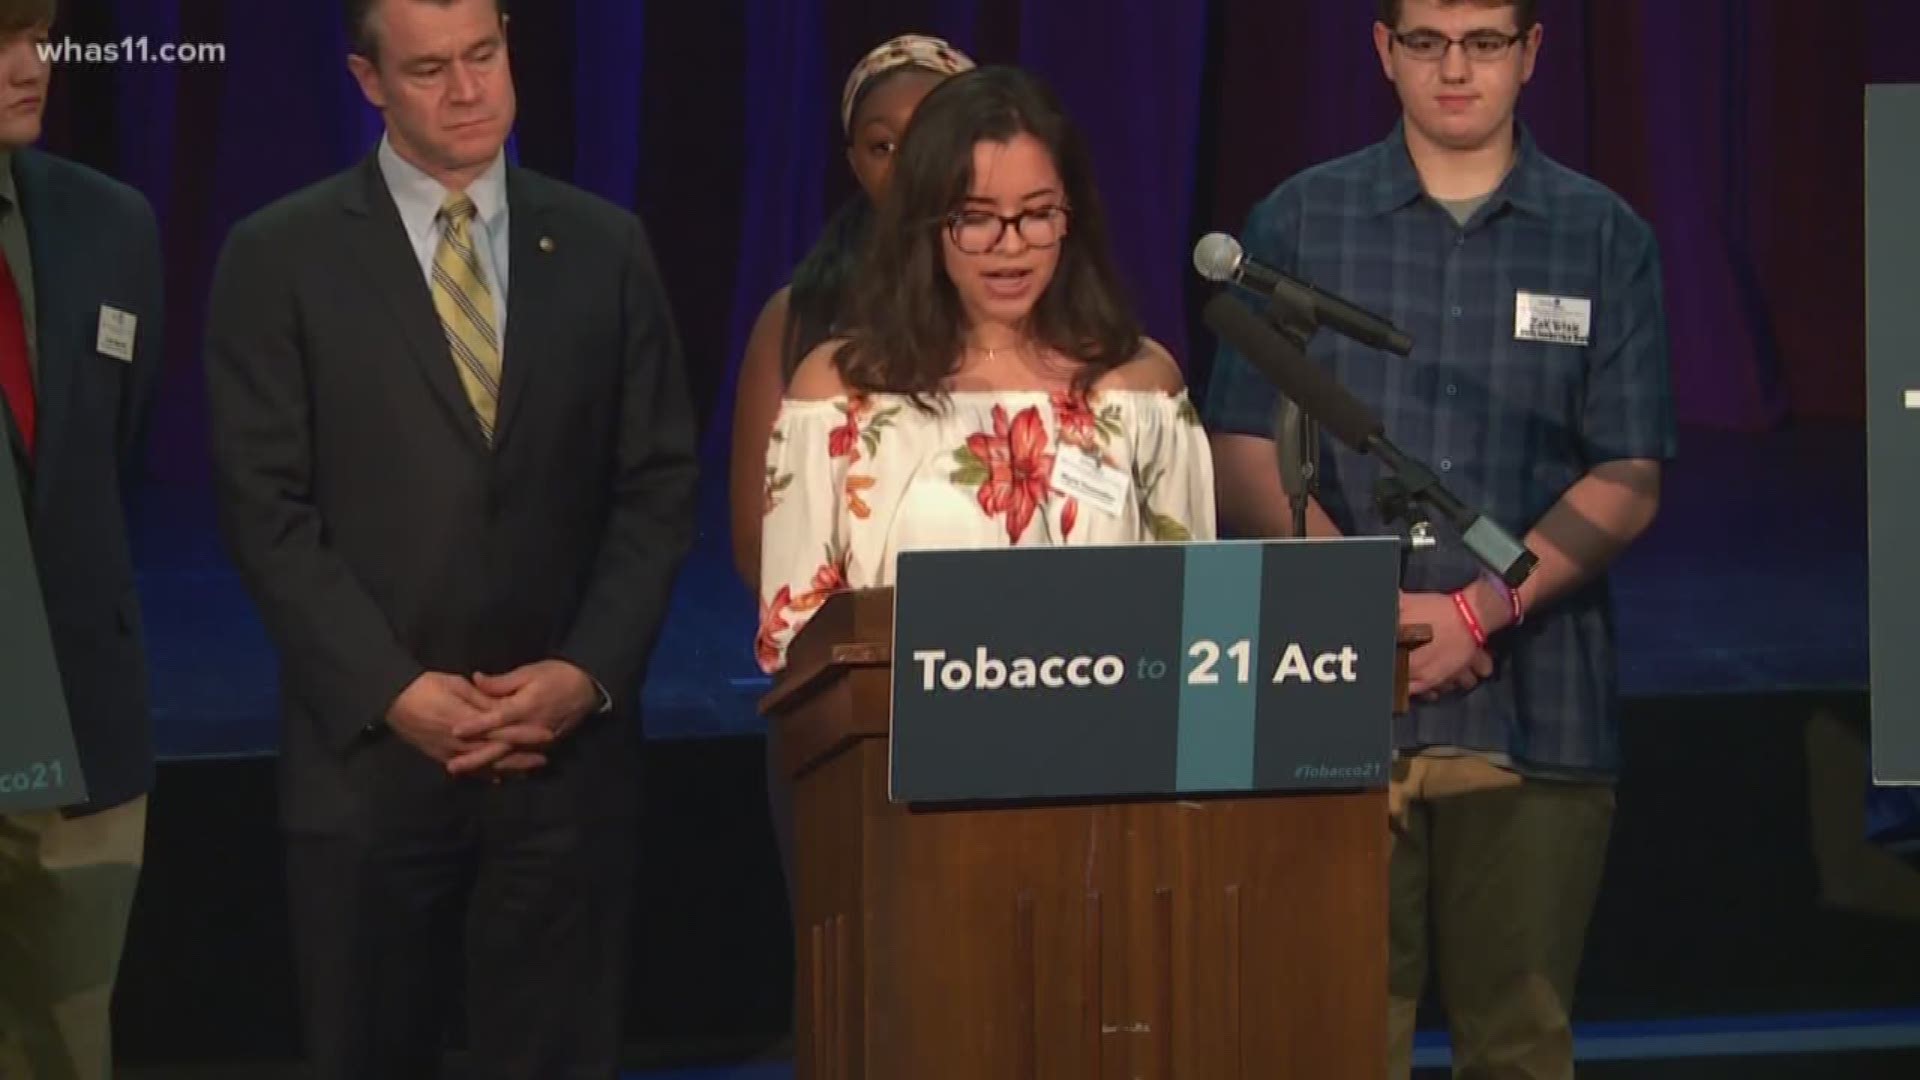 Senator Todd Young is a co-sponsor of the legislation that would prohibit the sale of tobacco products, including e-cigarettes, to anyone under the age of 21.